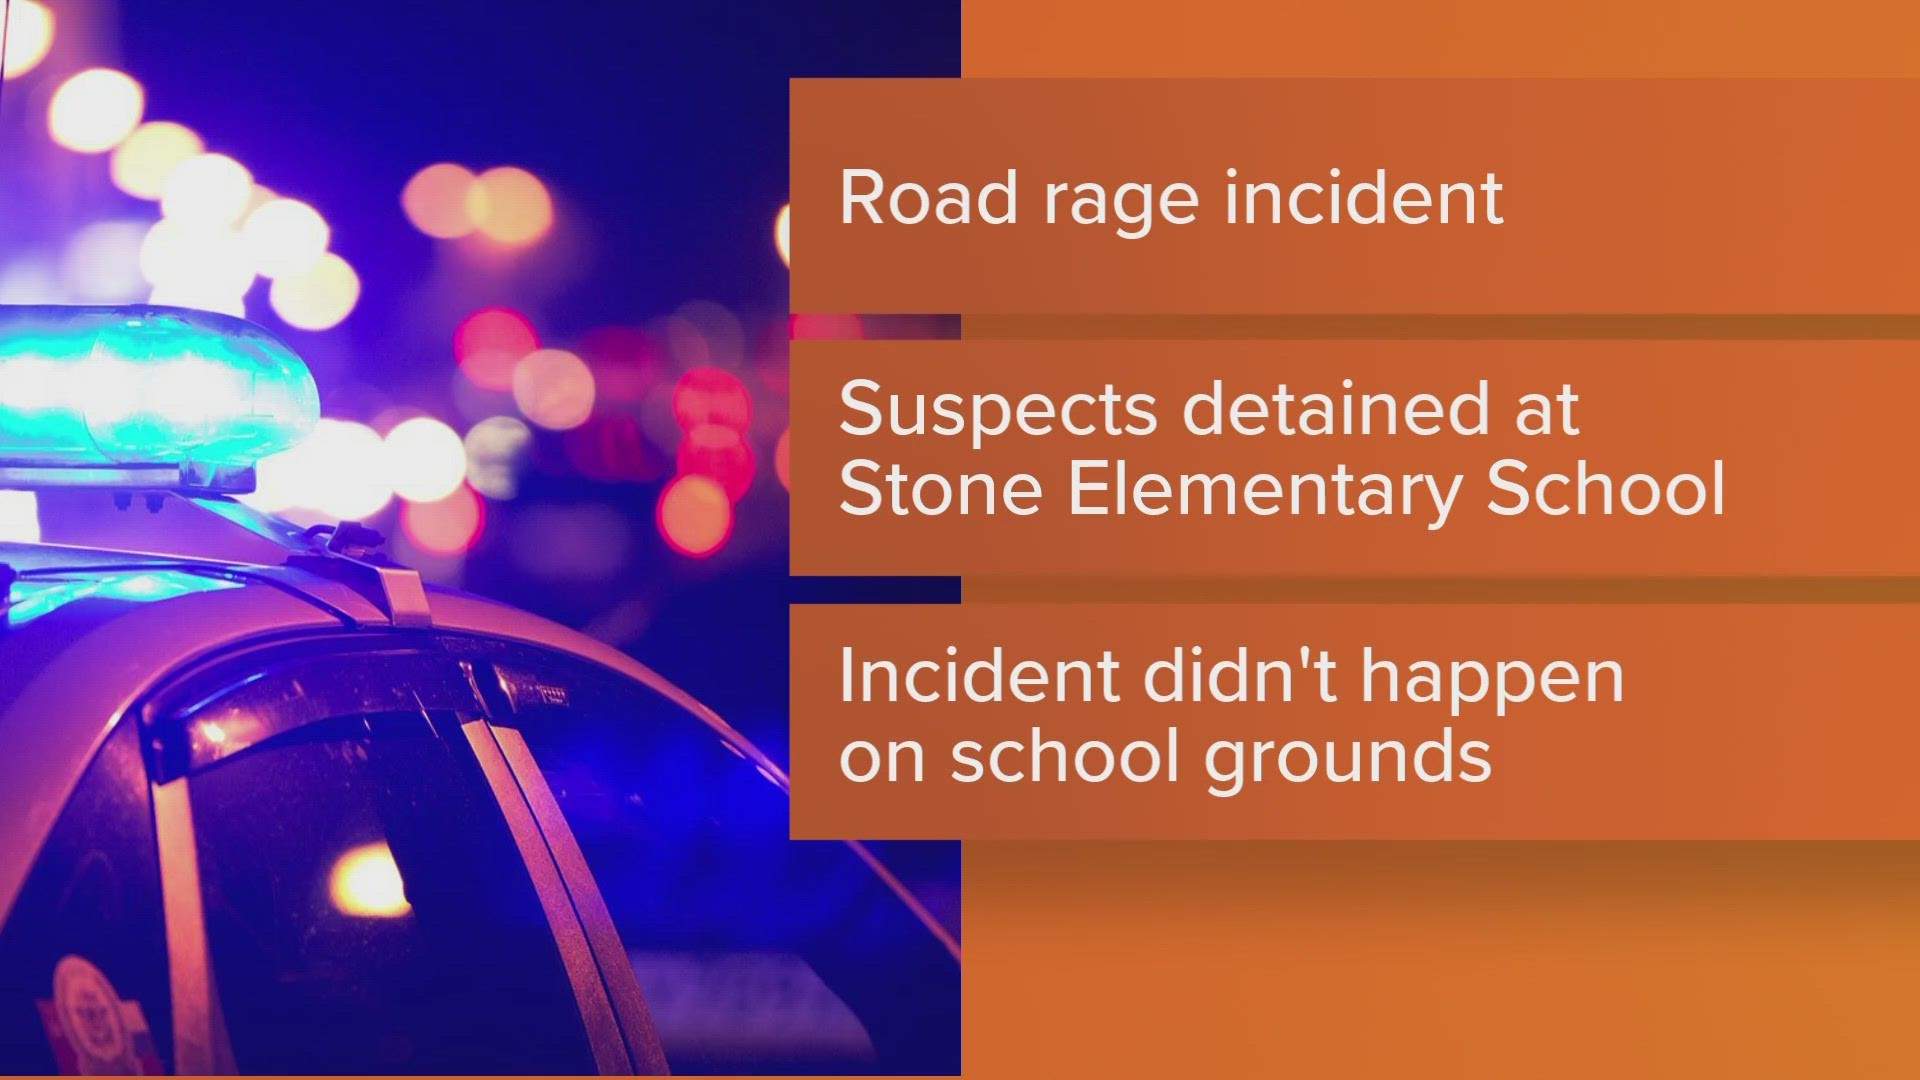 According to police, no one was injured during that road rage shooting. The shooting did not happen on school grounds but two schools did go into lockdown.